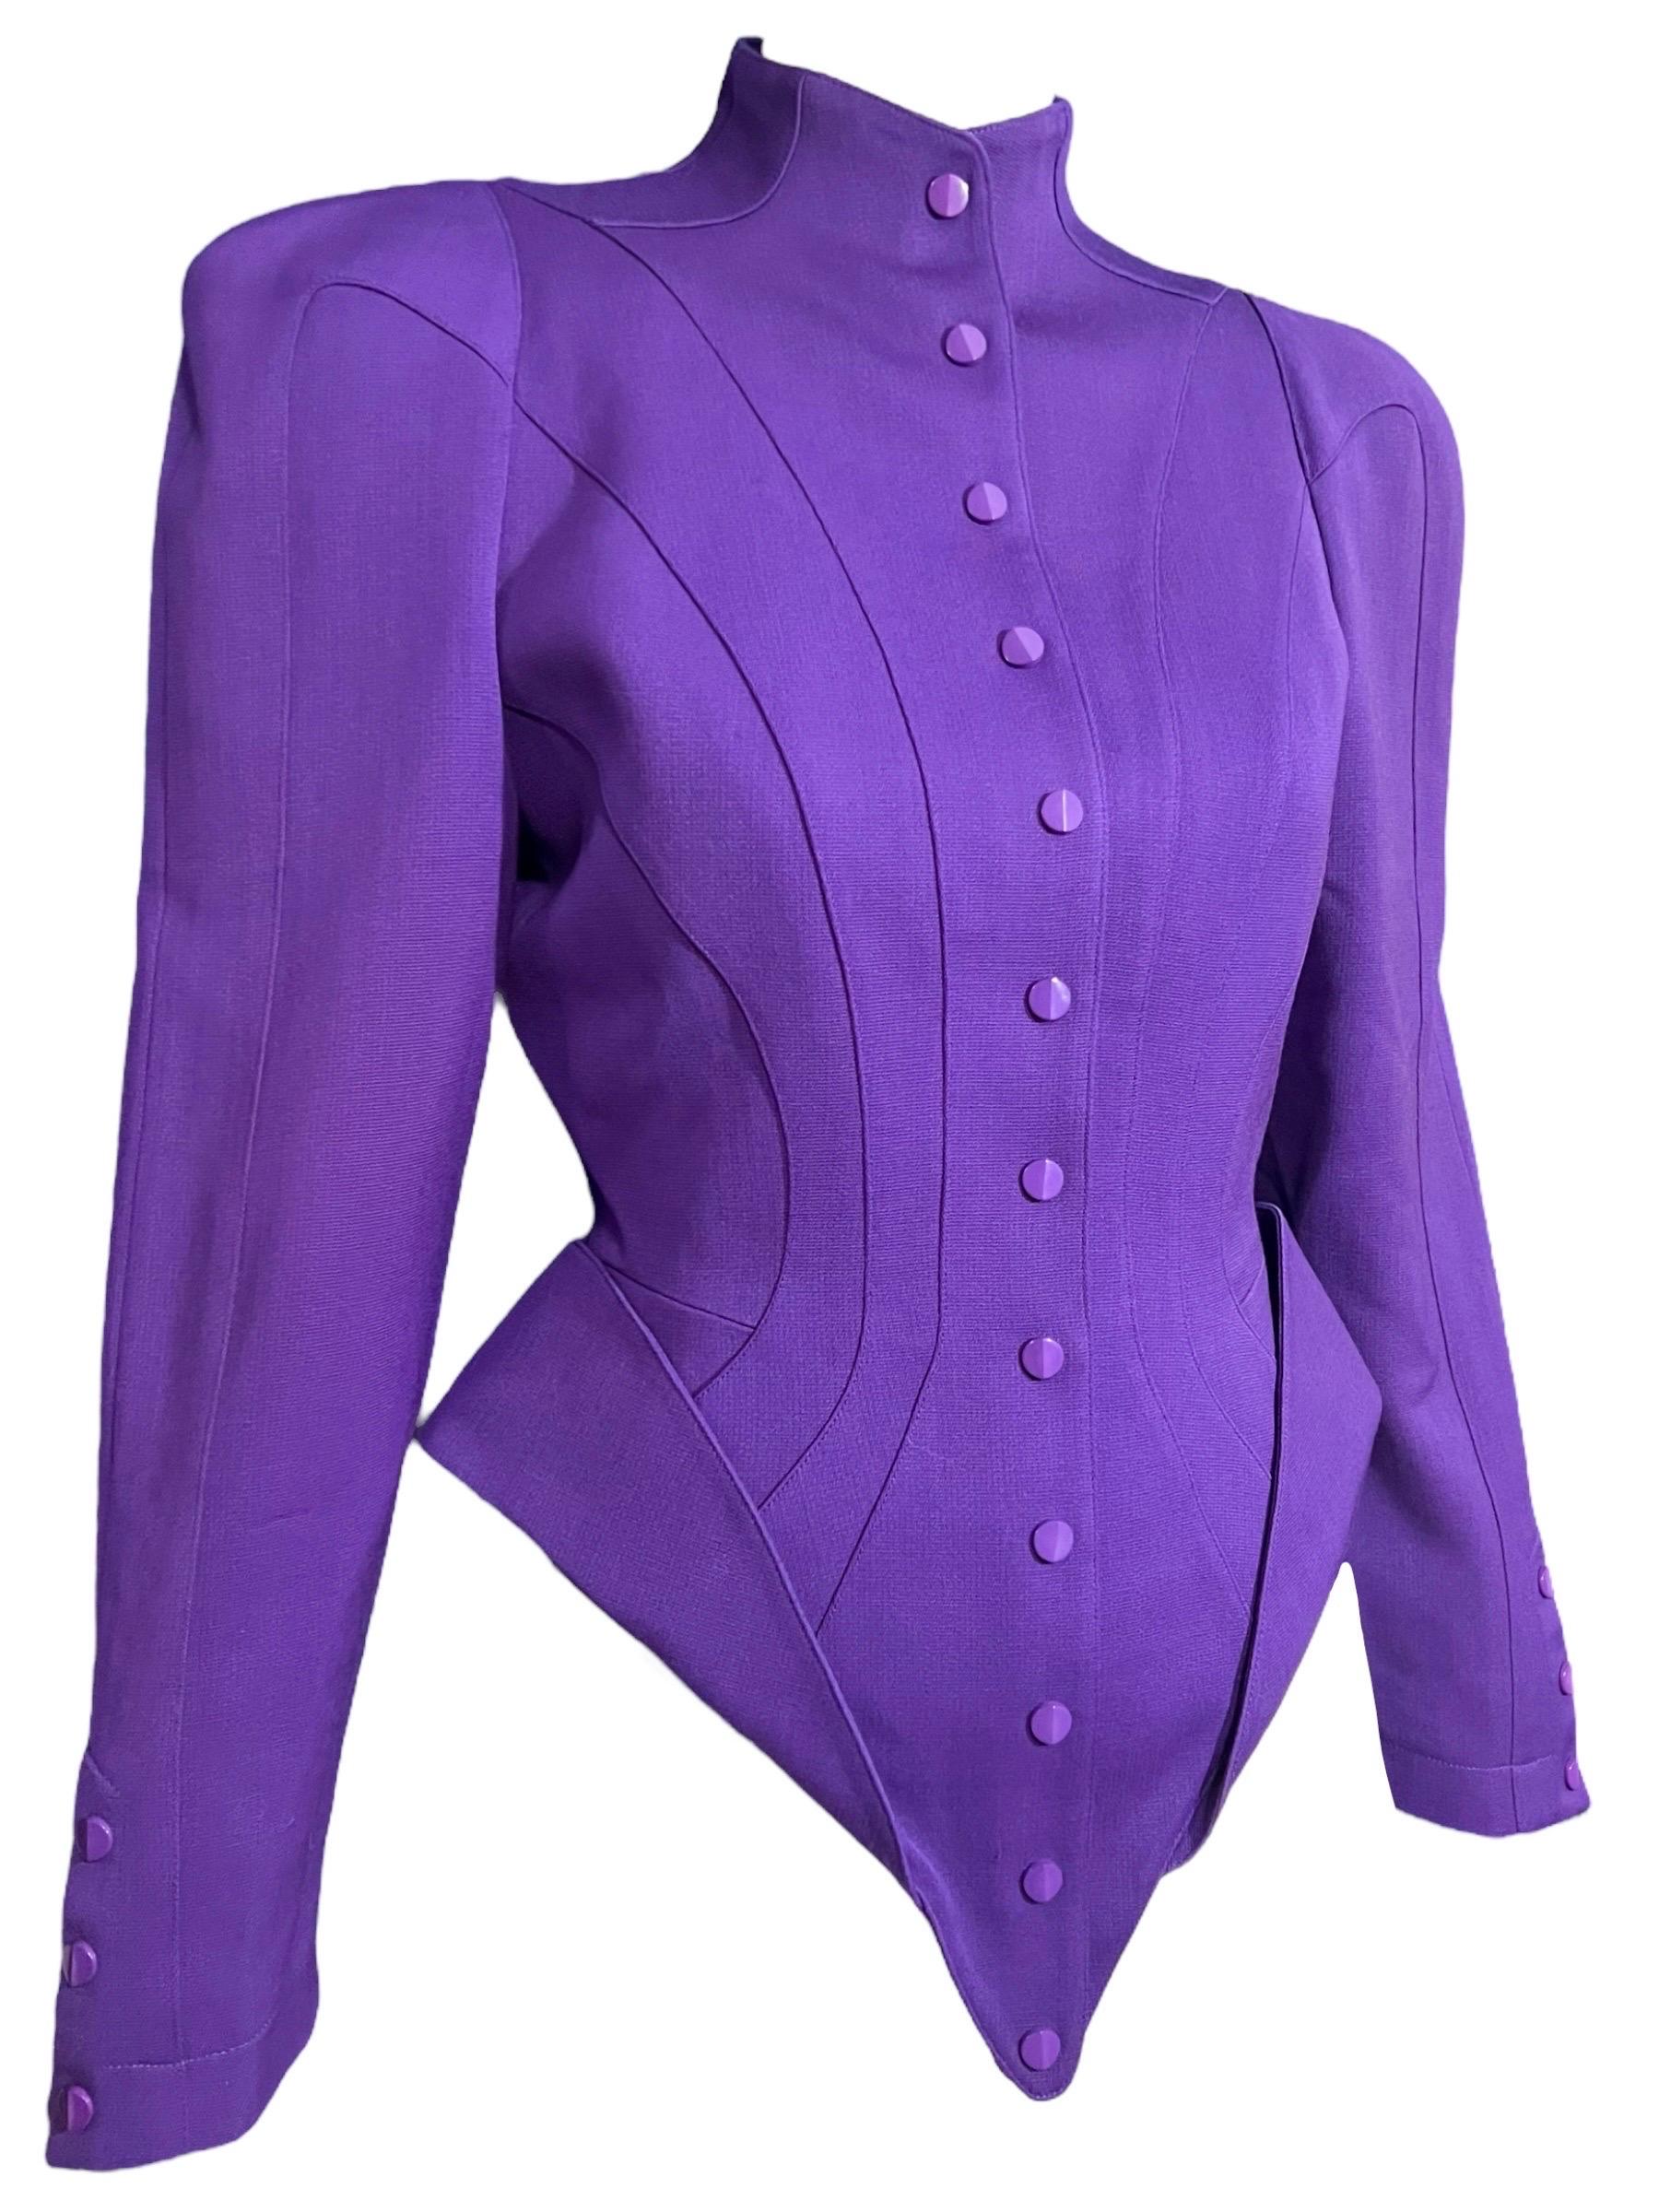 F/W 1988 Thierry Mugler Purple Futuristic Les Infernales Sculptural Jacket In Excellent Condition For Sale In Concord, NC